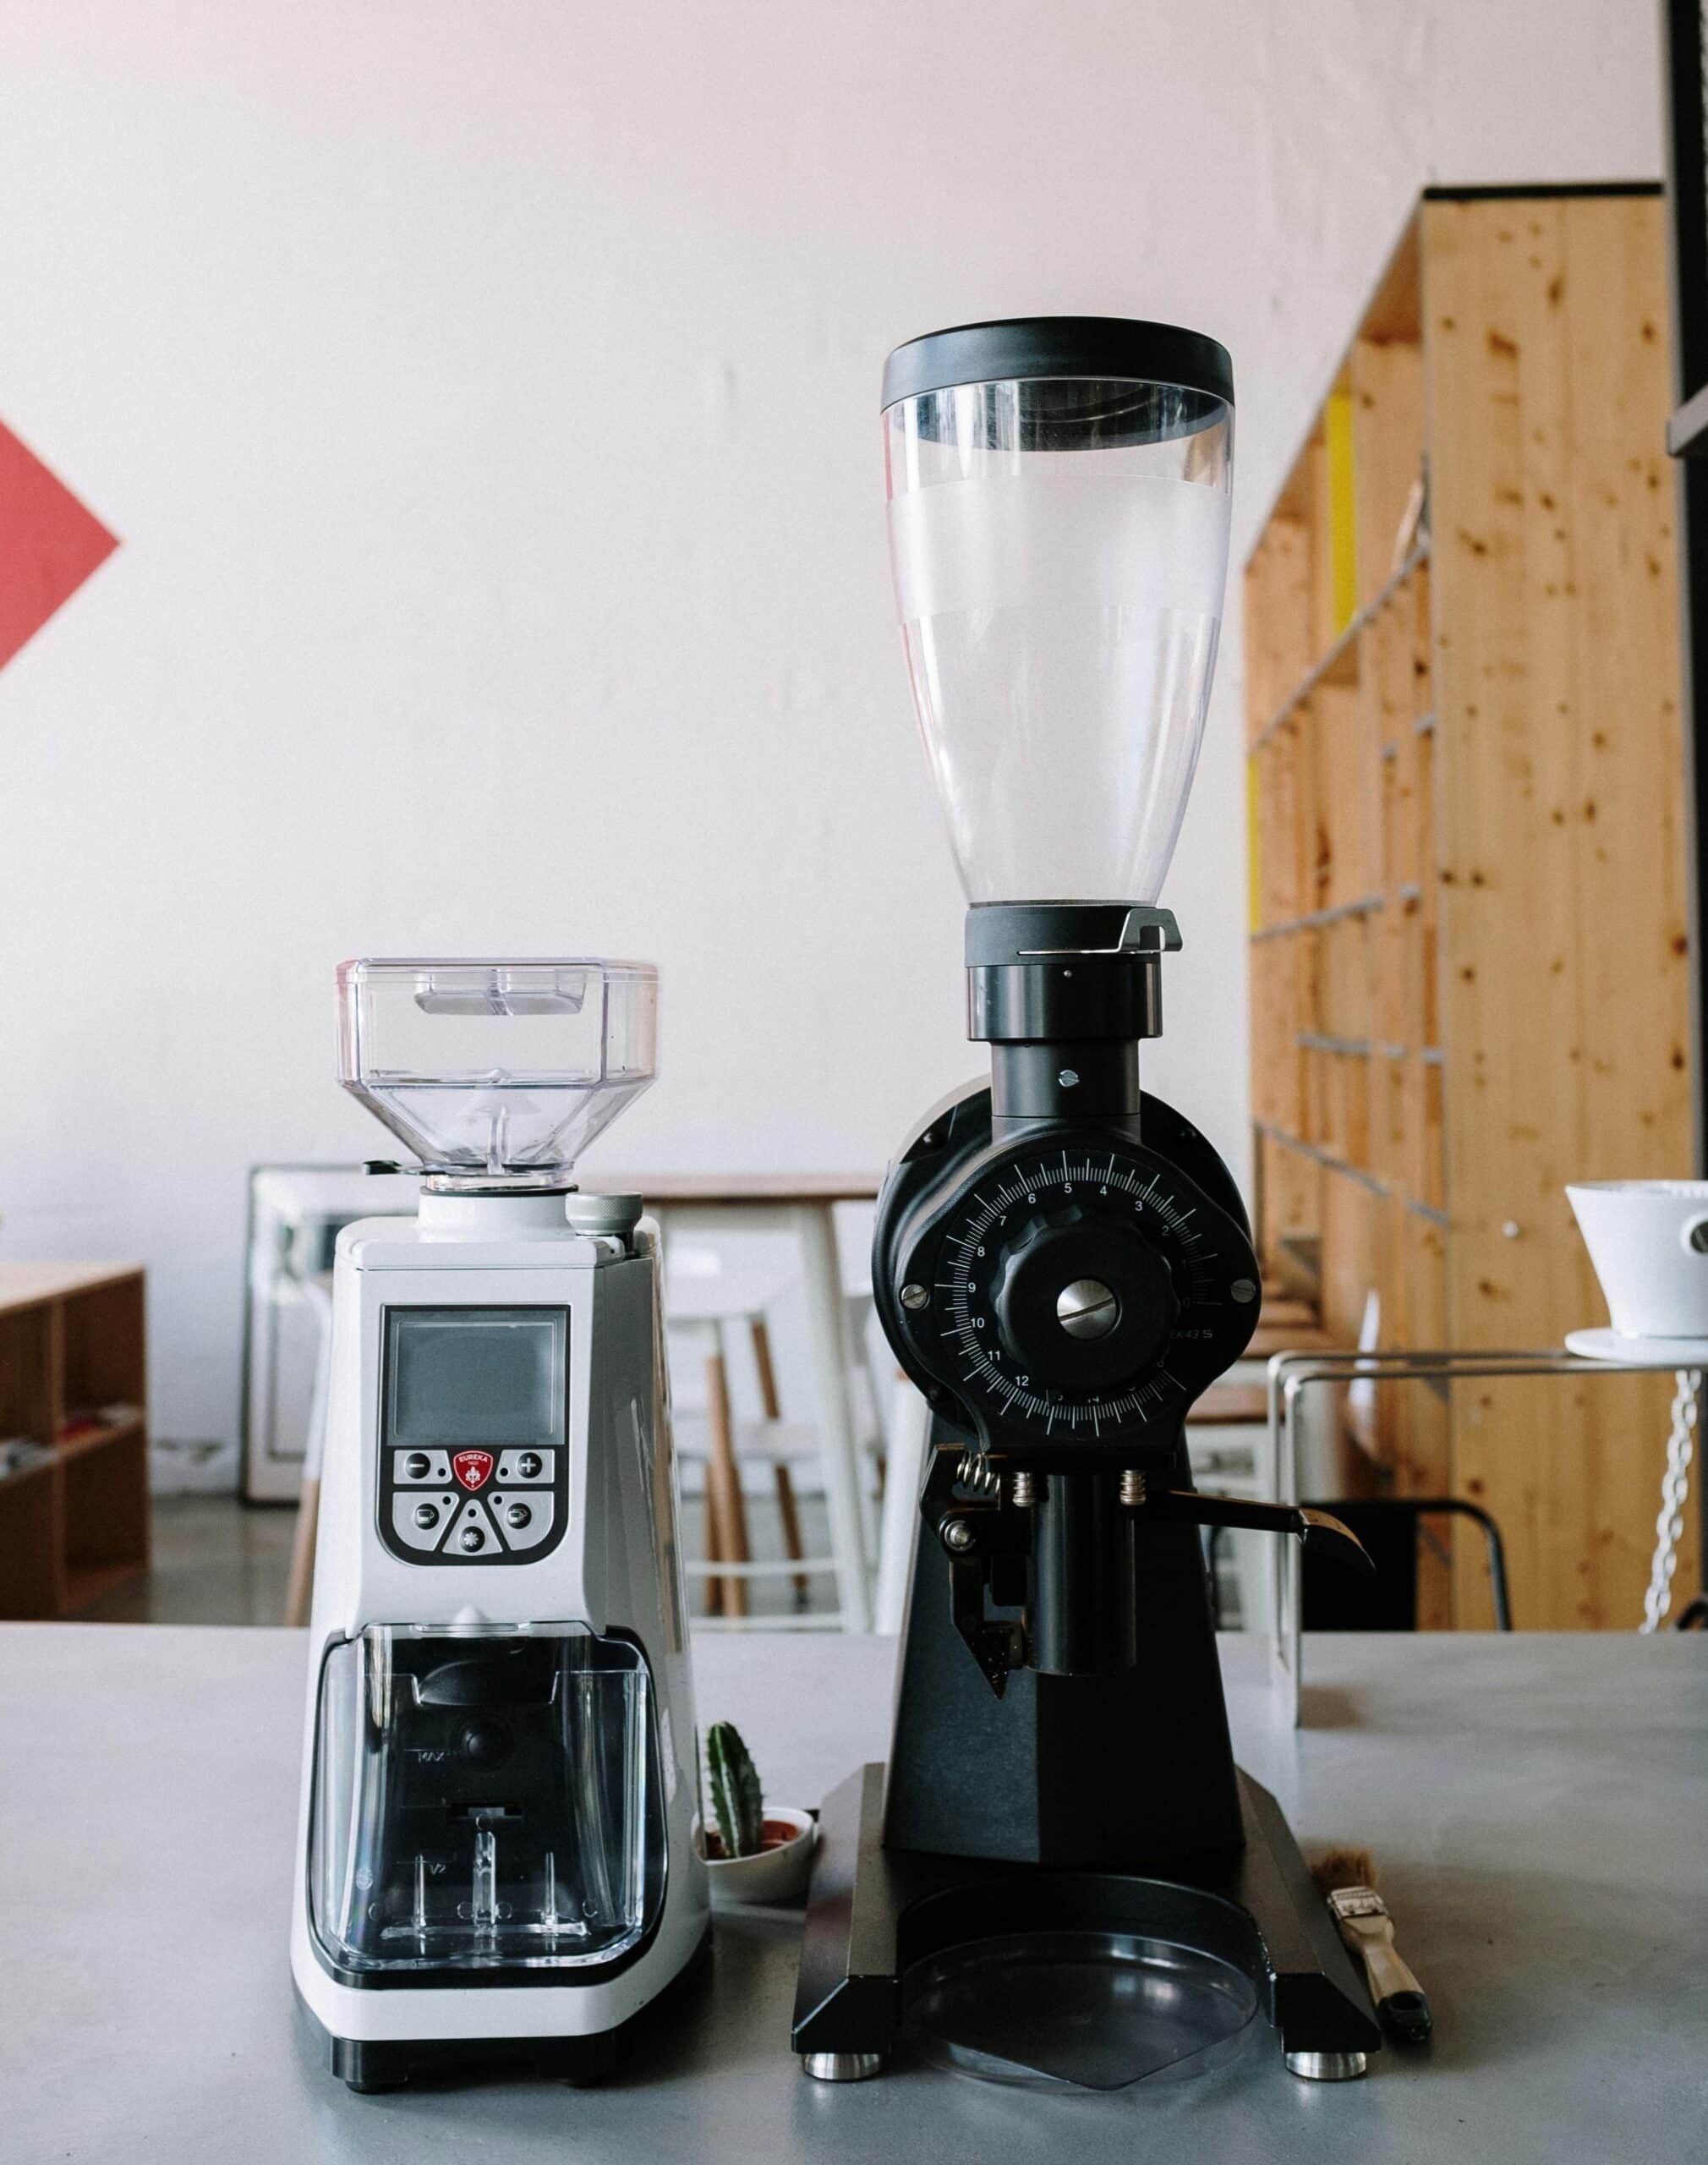 an espresso grinder and a coffee grinder sit on a counter